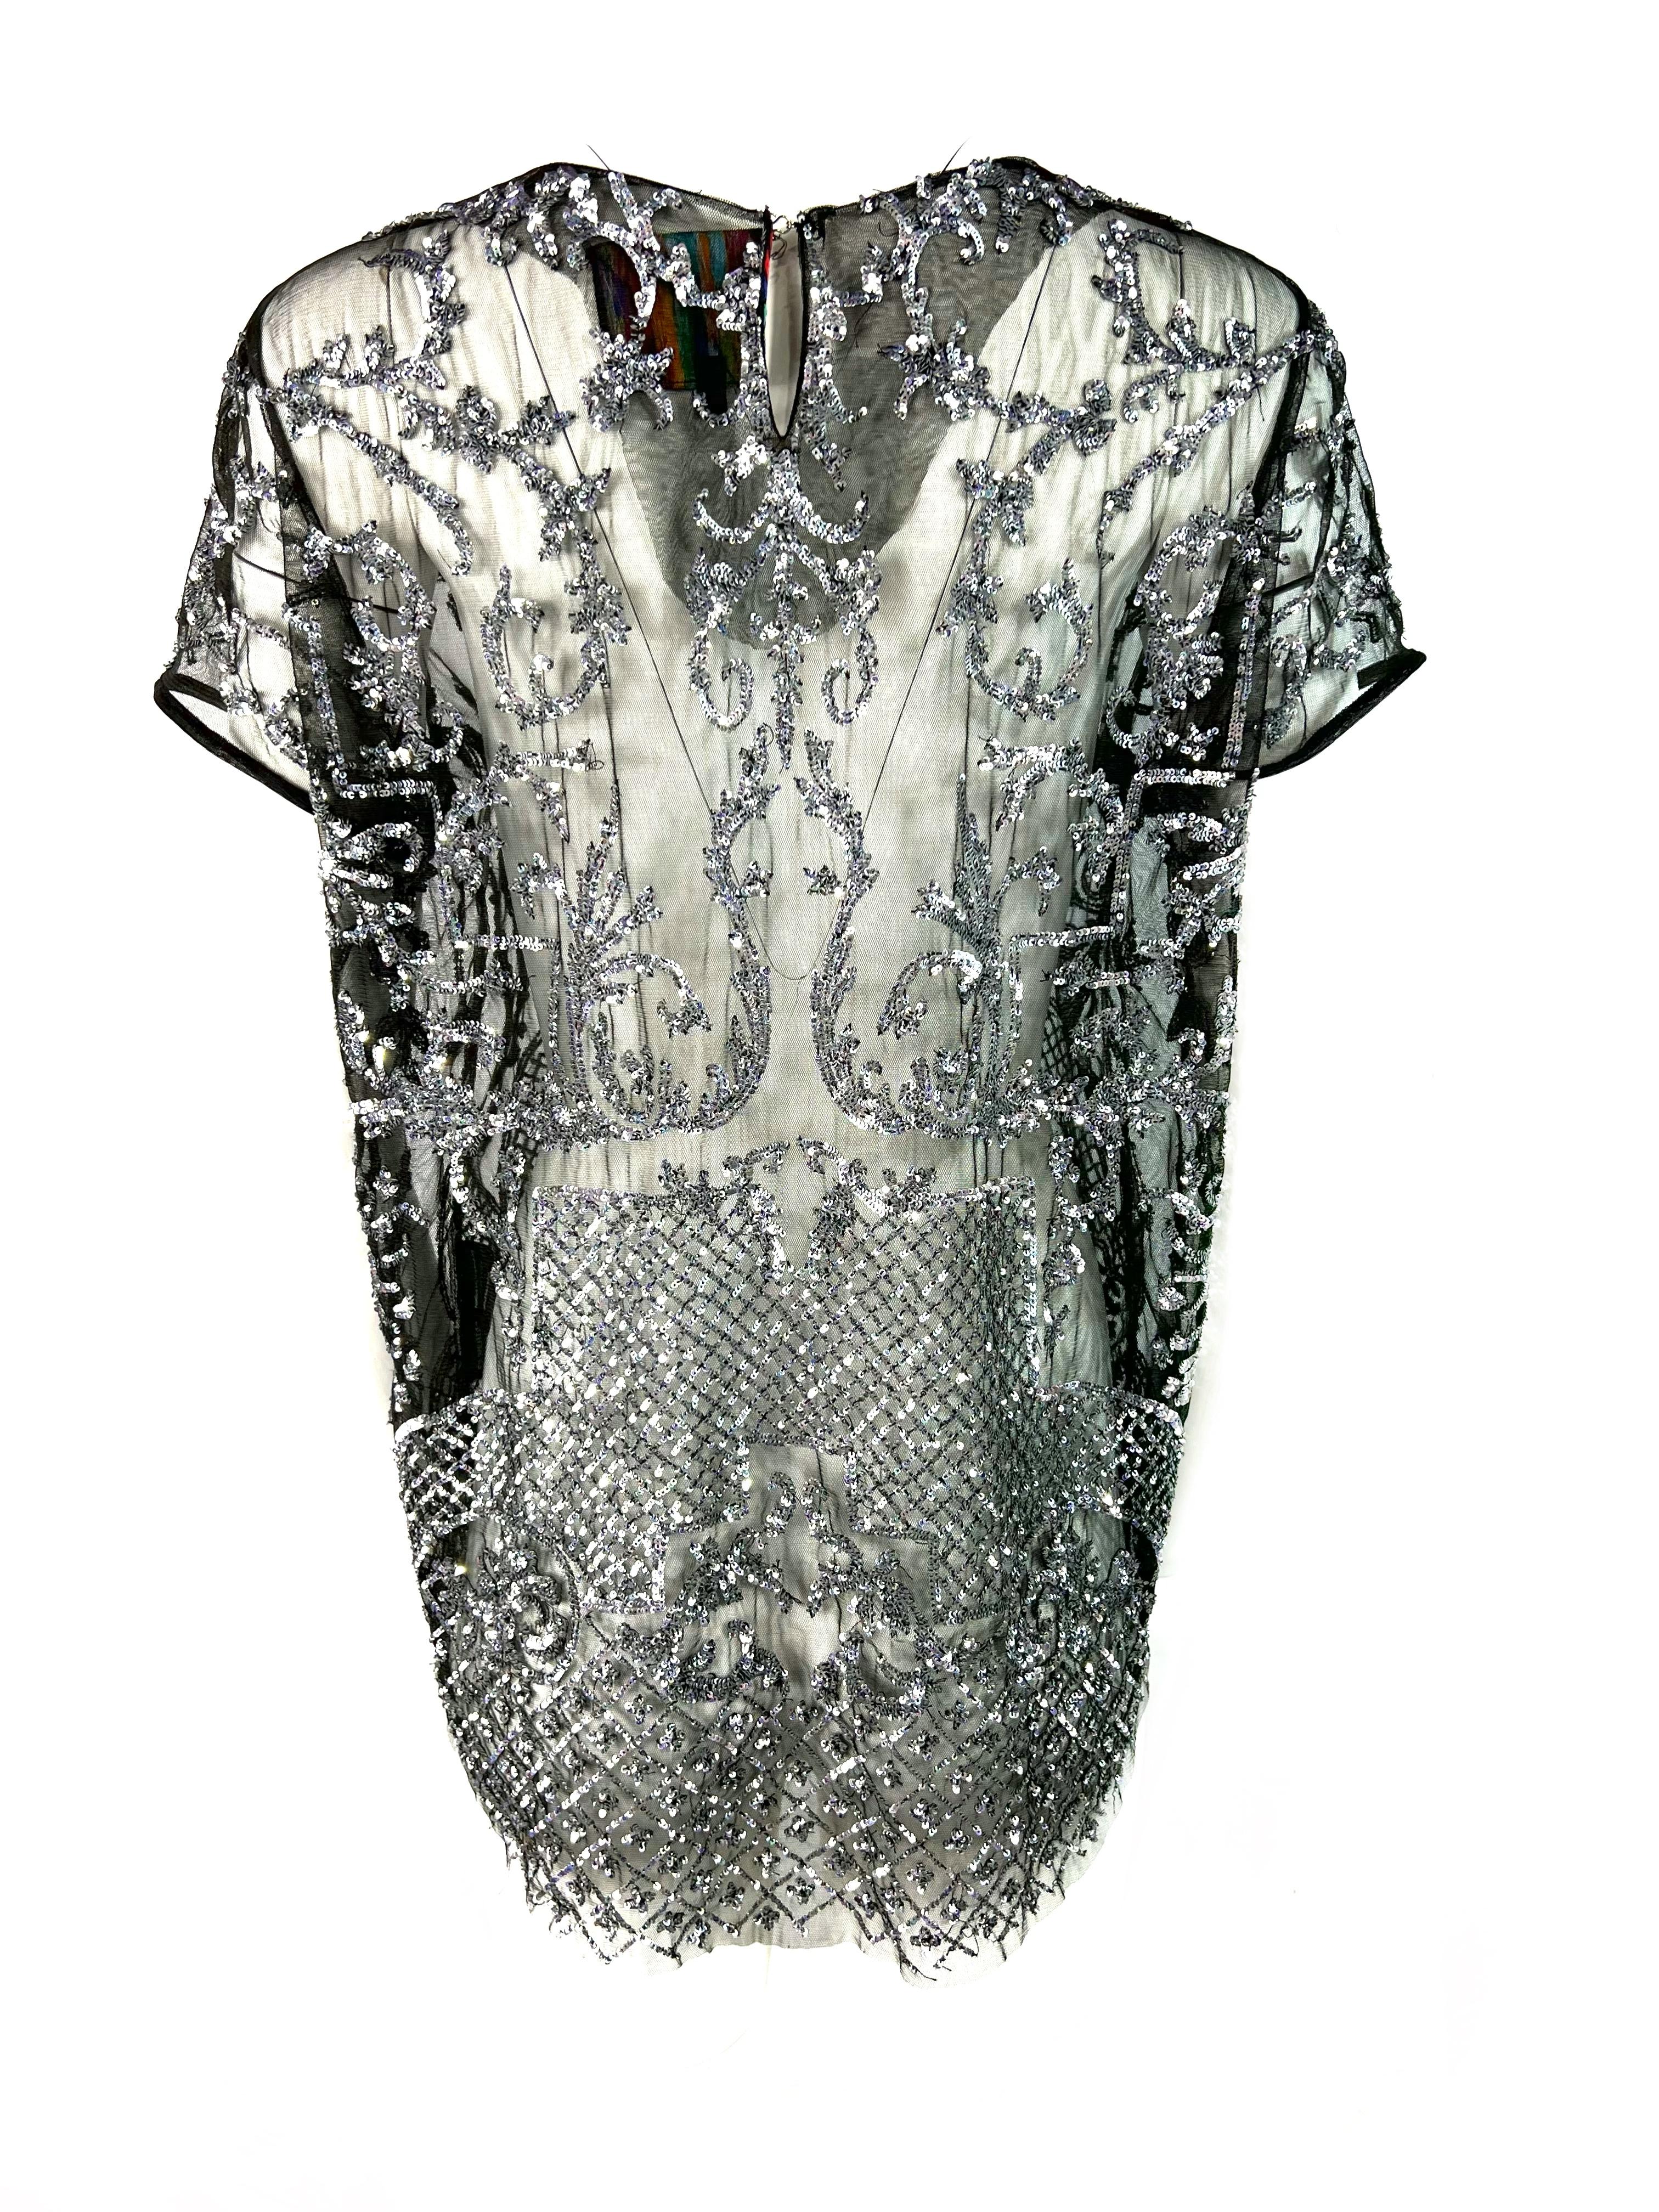 Libertine Black Mesh and Silver Metallic Sequin Top, Size Large In Excellent Condition For Sale In Beverly Hills, CA